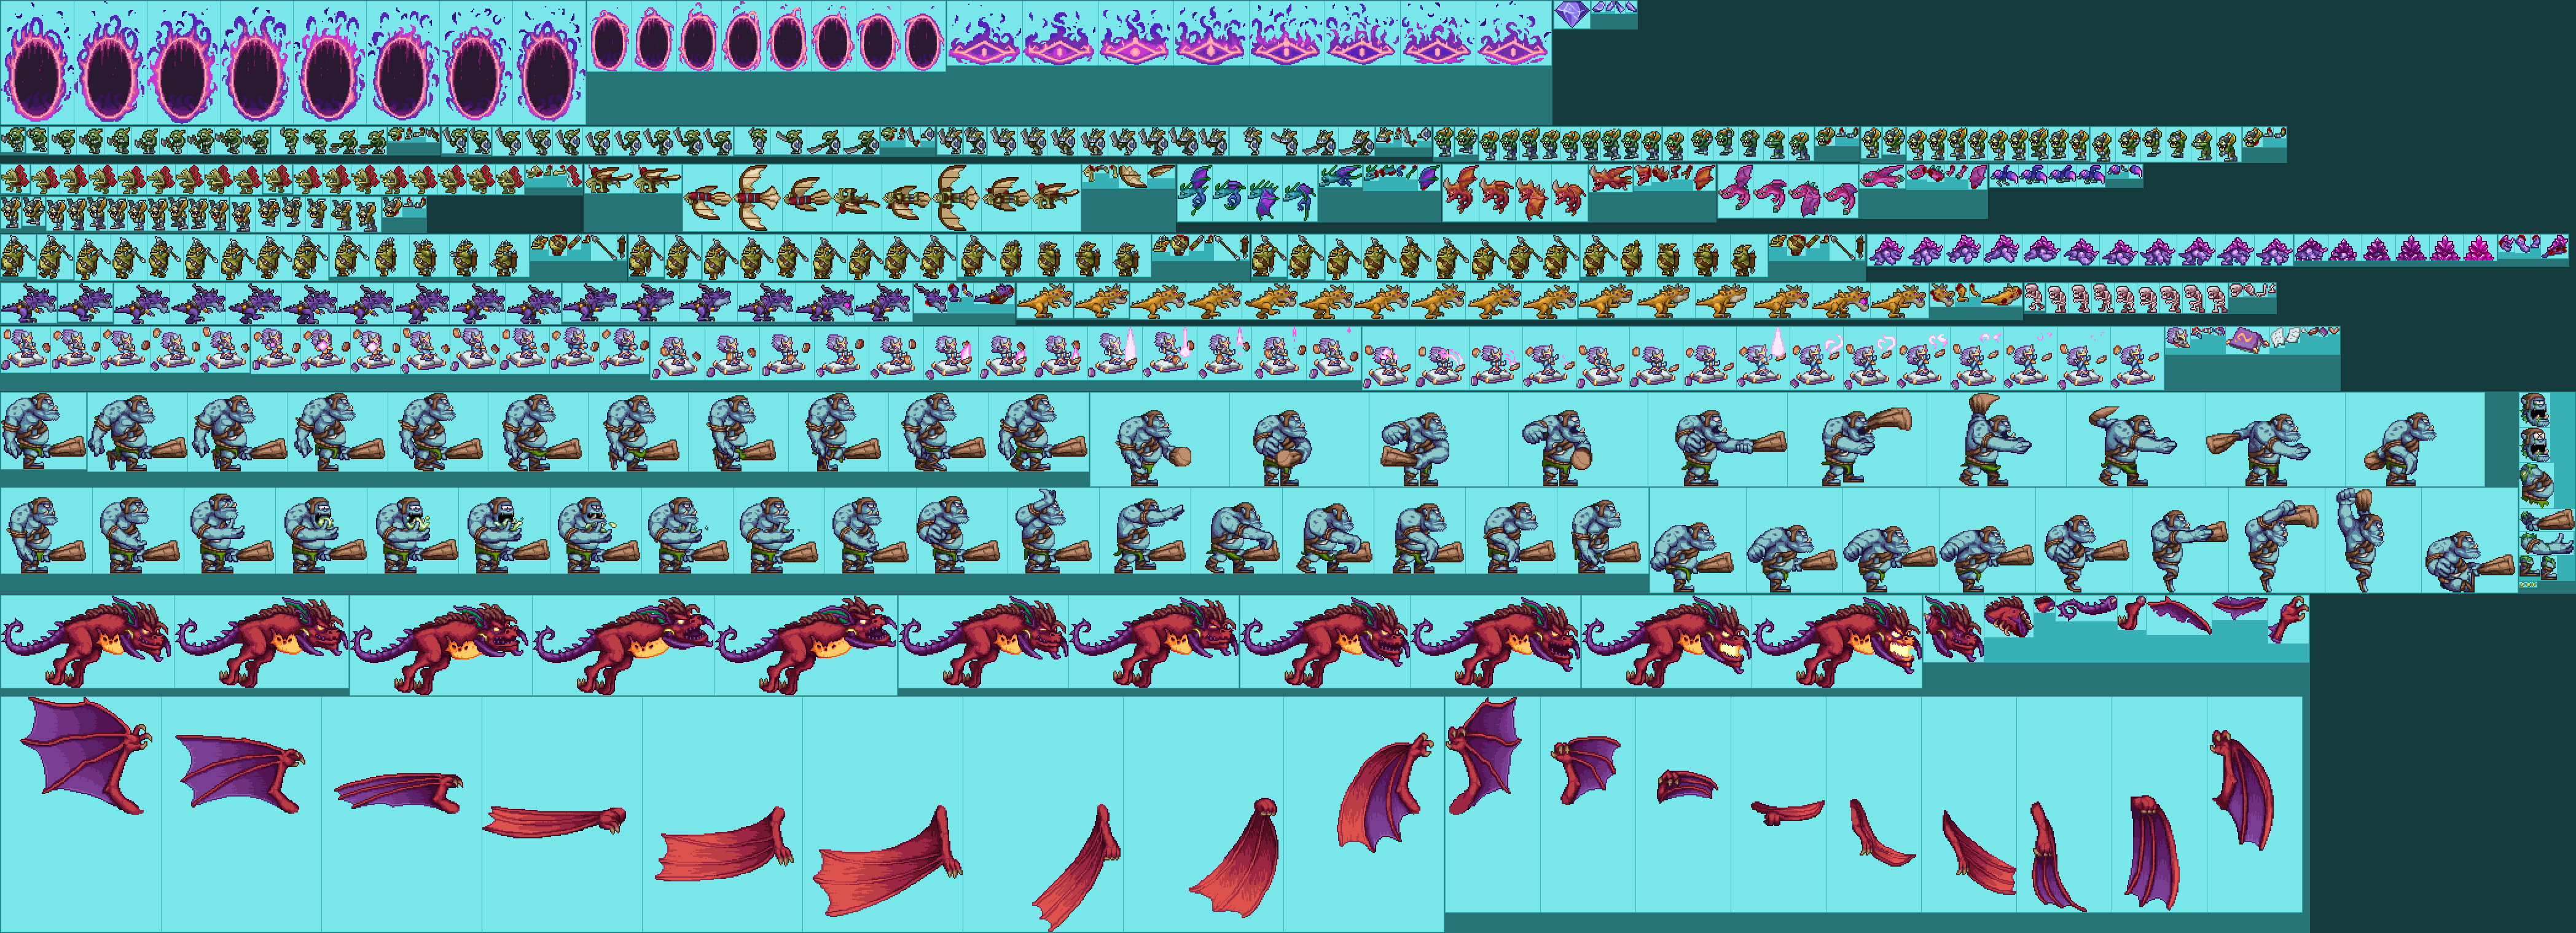 Terraria - Old One's Army